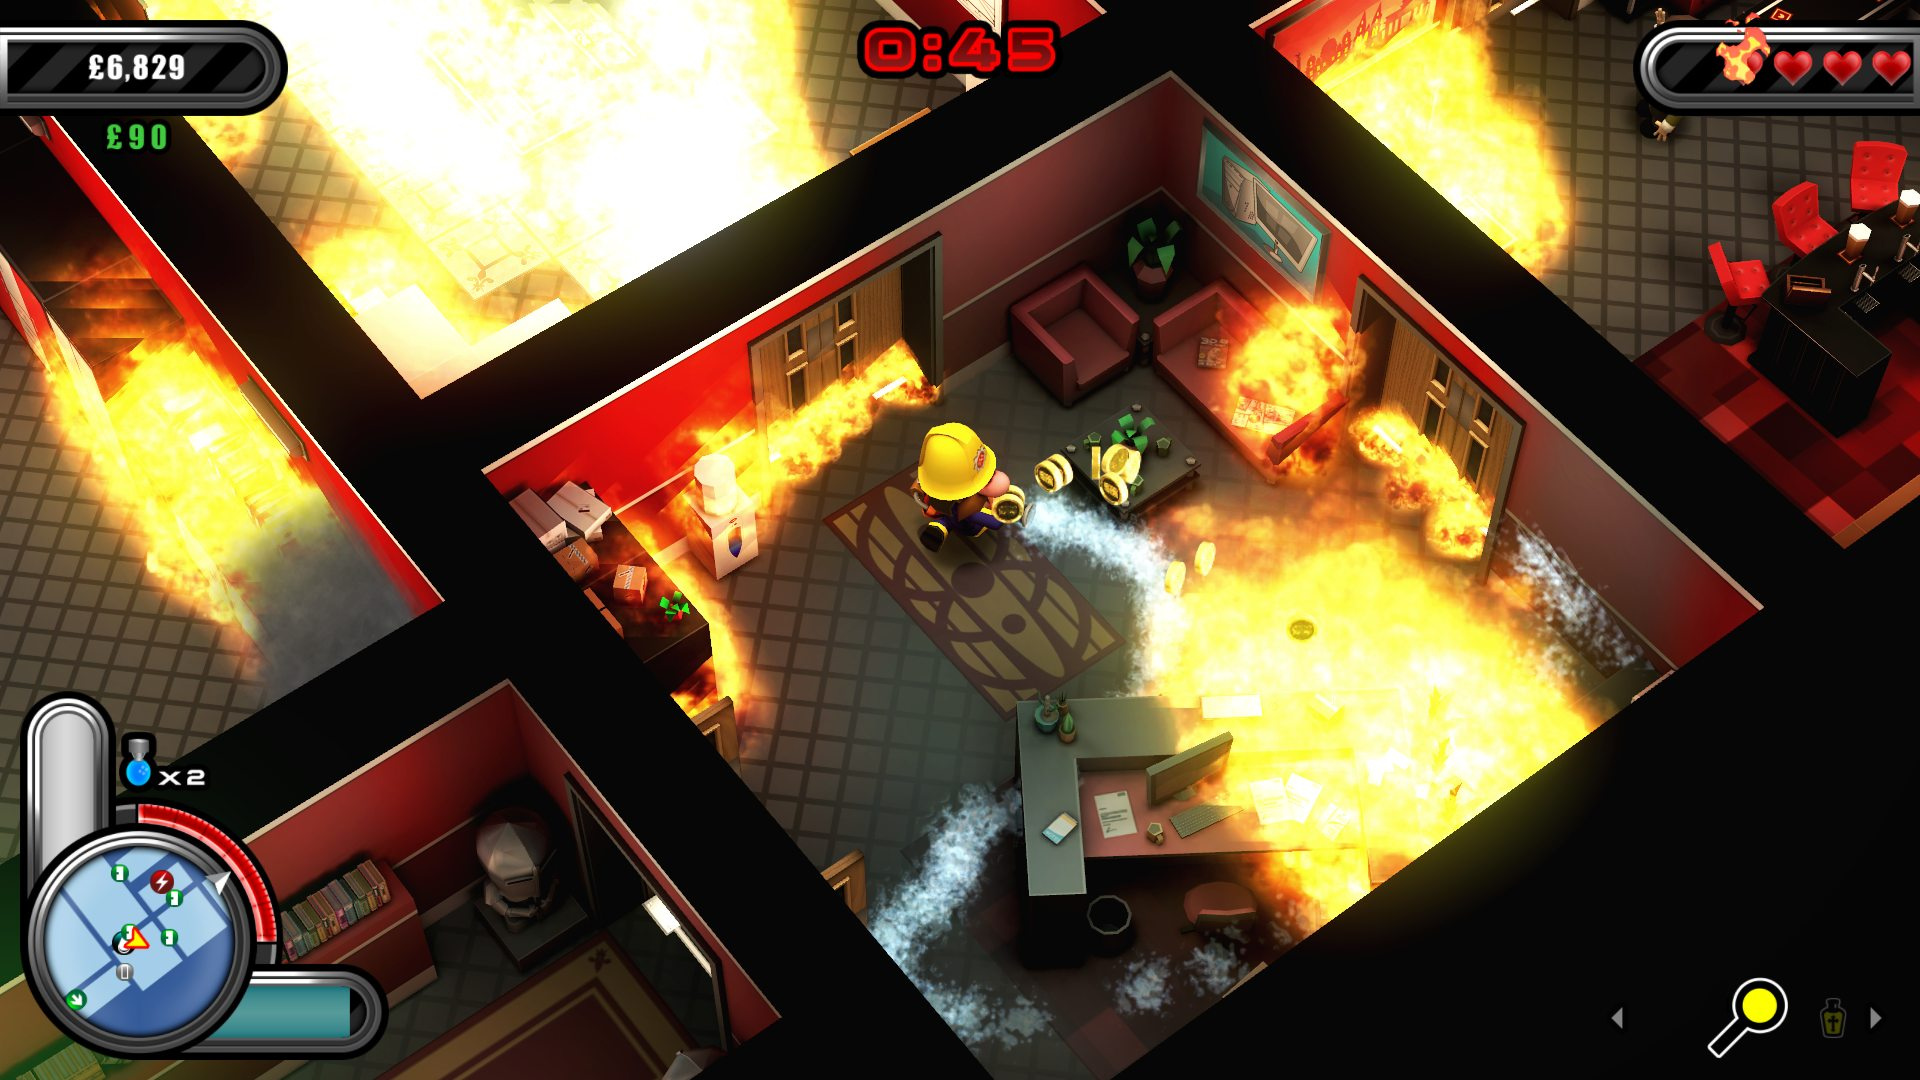 Flame Over (PS4 / PlayStation 4) Game Profile | News, Reviews, Videos